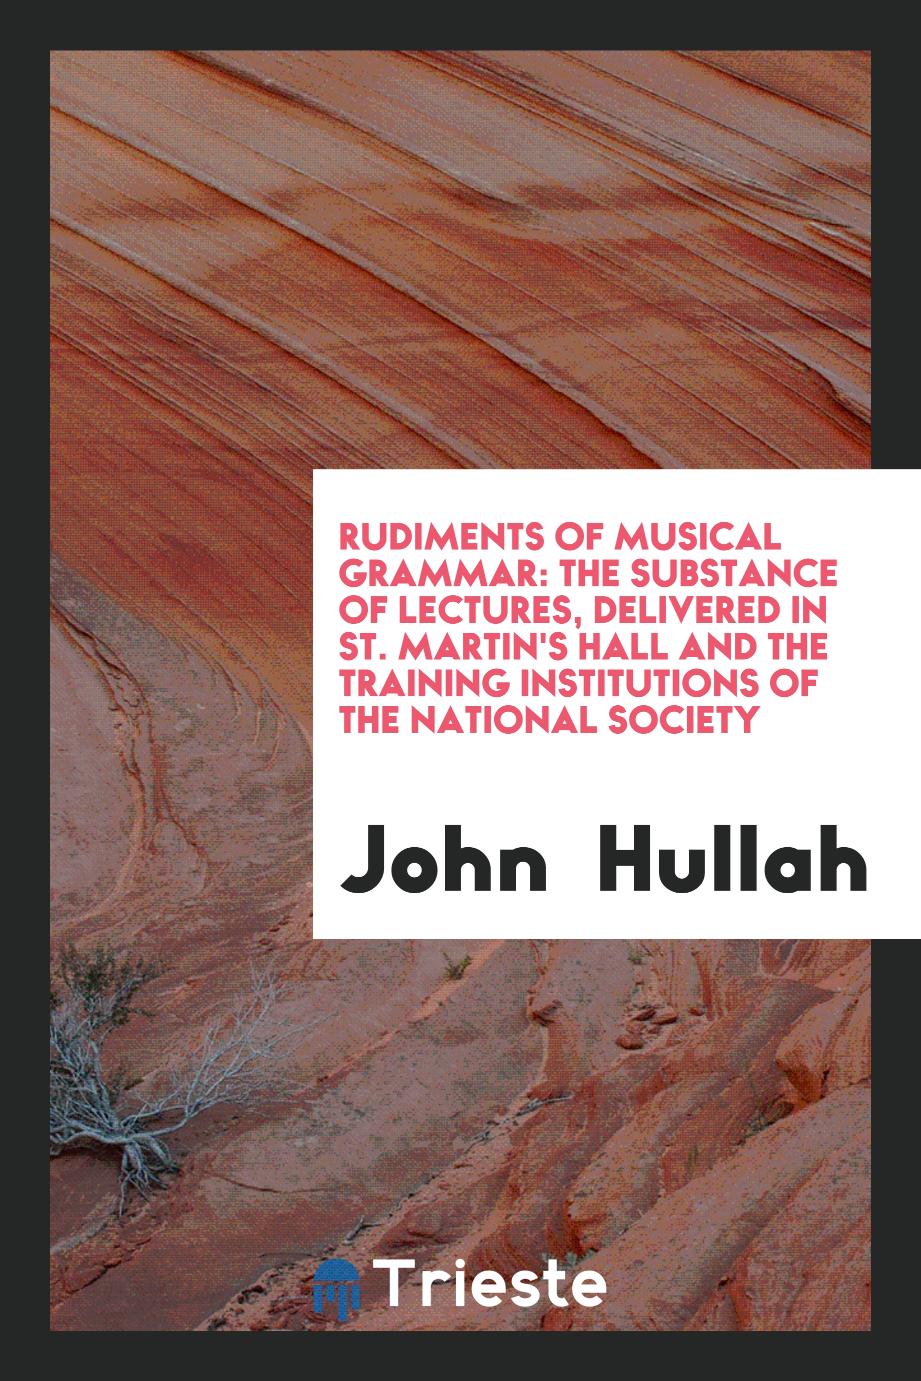 Rudiments of musical grammar: The substance of lectures, Delivered in St. Martin's Hall and The Training Institutions of the National Society